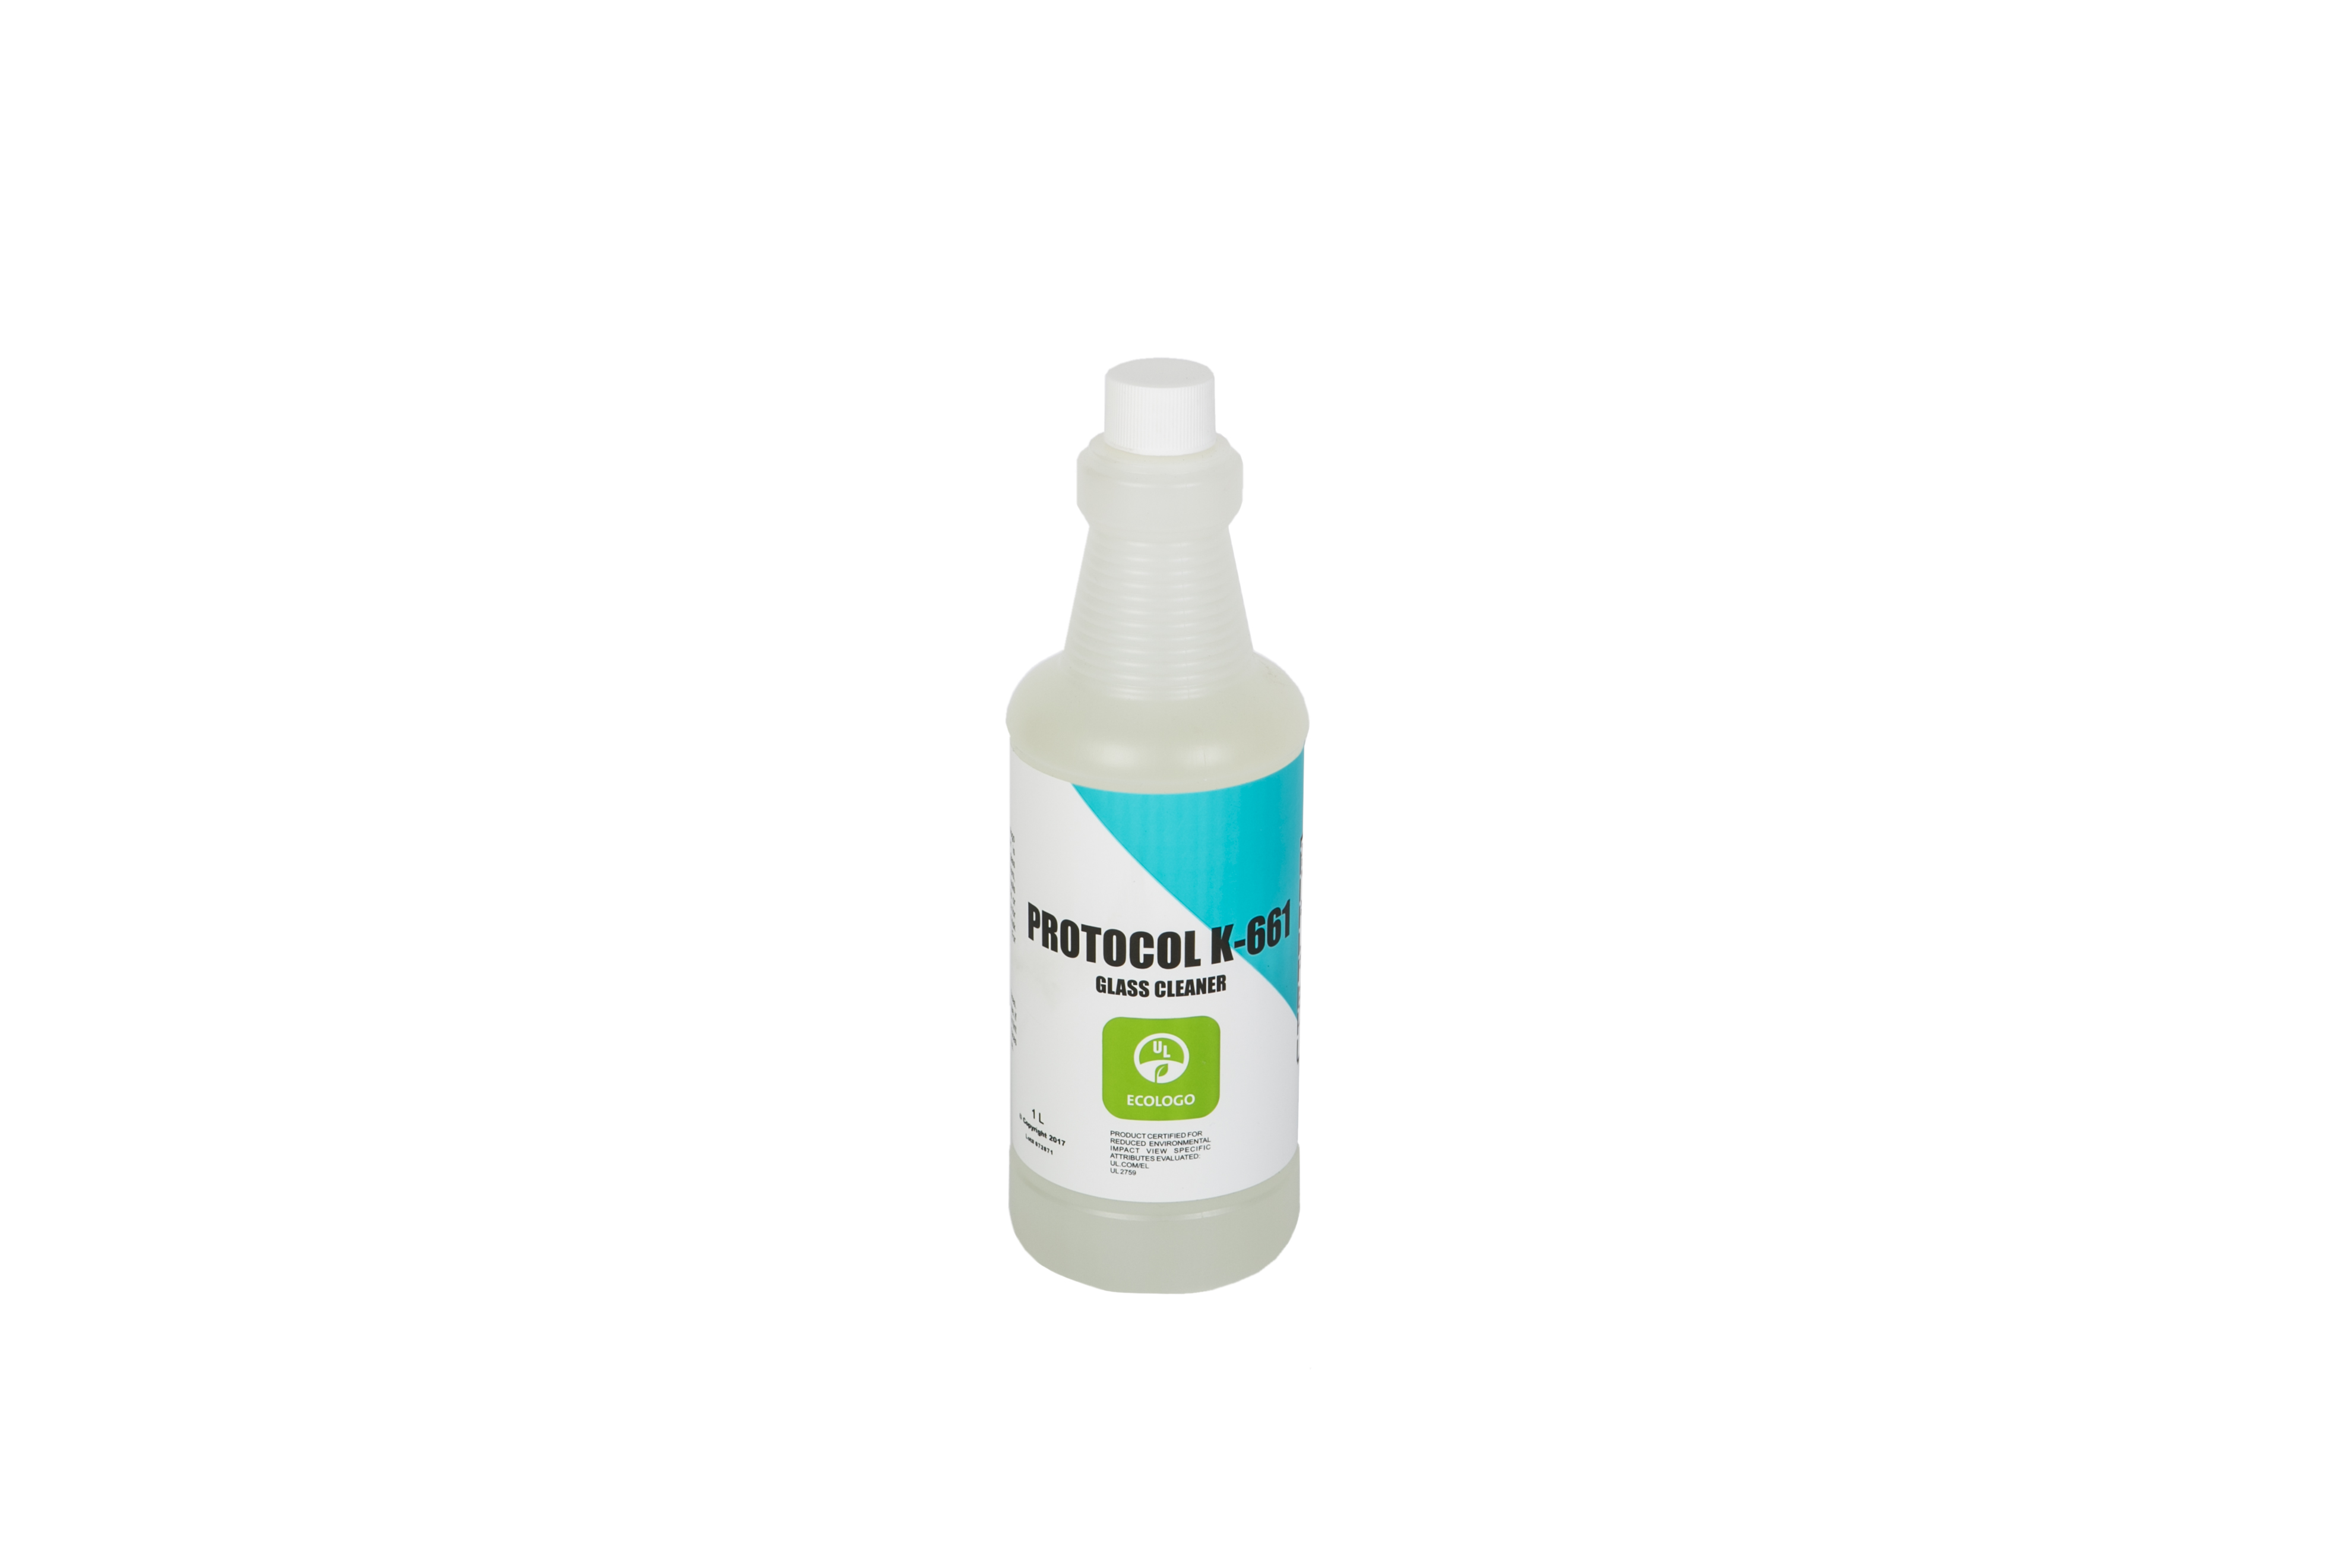 Protocol K661 UL Eco Certified Glass Cleaner - 1 Litre